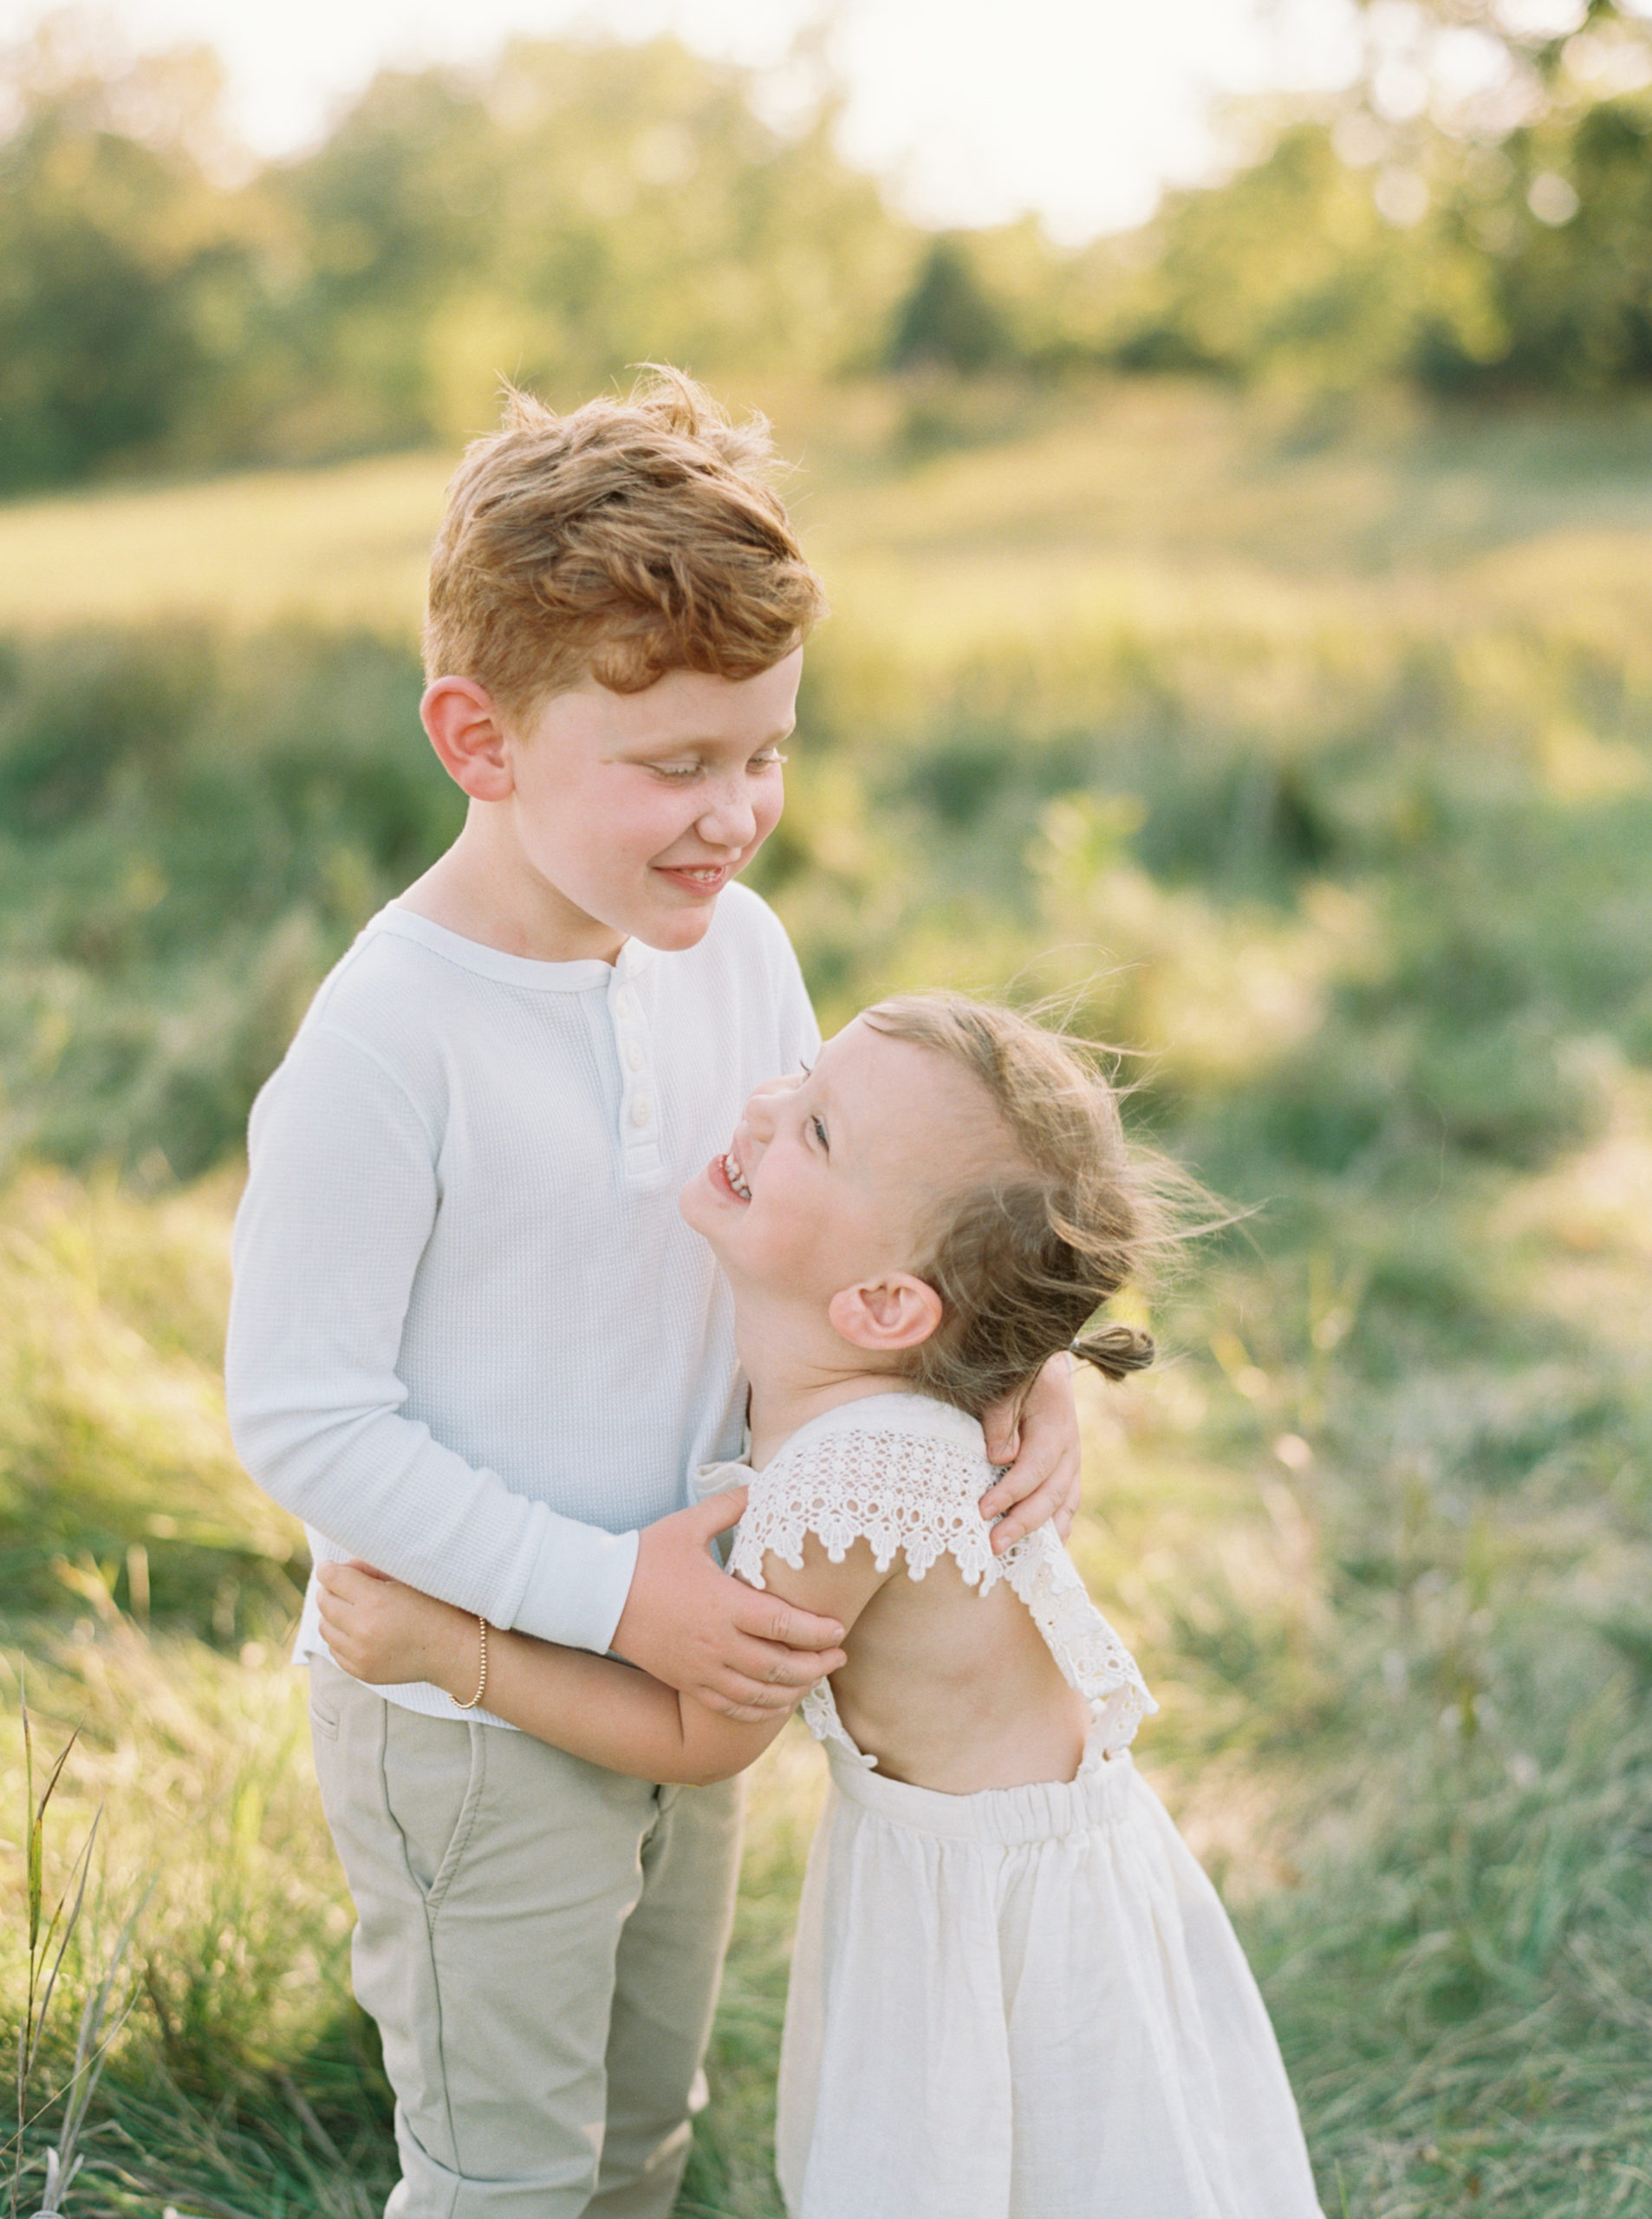 Brother and Sister cuddling in a grassy green field setting in Shorewood in the summer